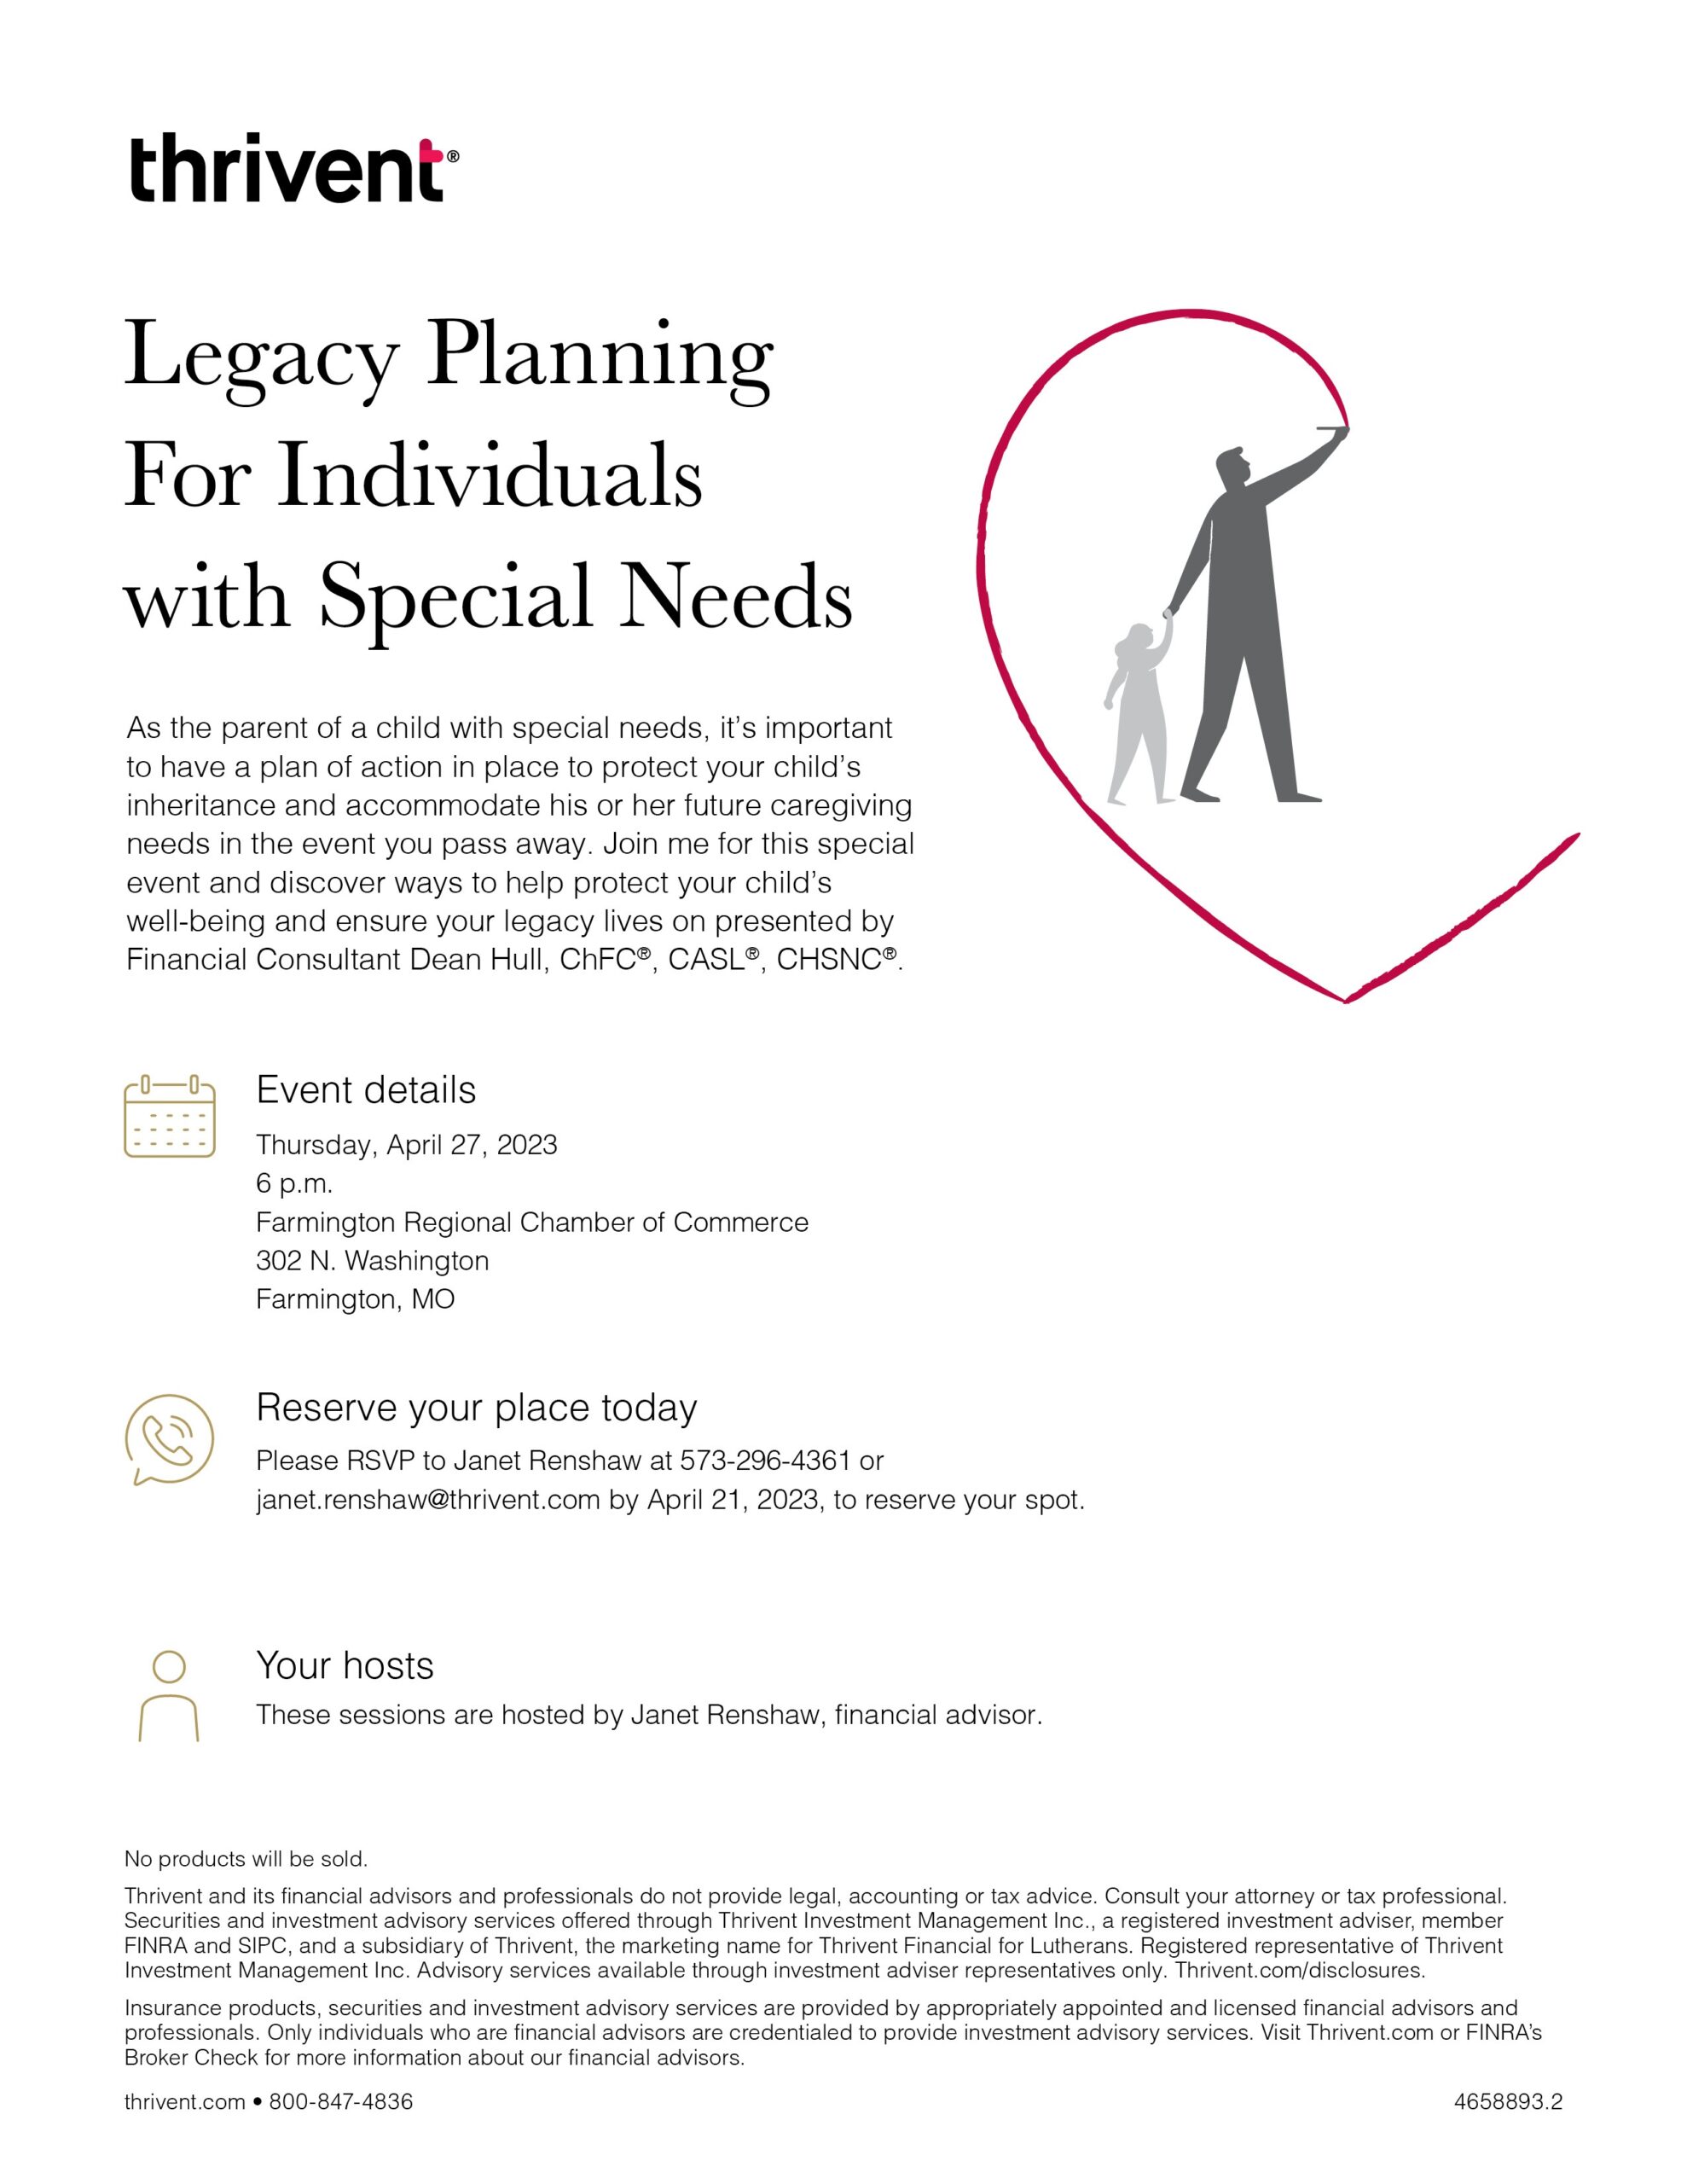 <h1 class="tribe-events-single-event-title">Legacy Planning for Individuals with Special Needs In Farmington</h1>